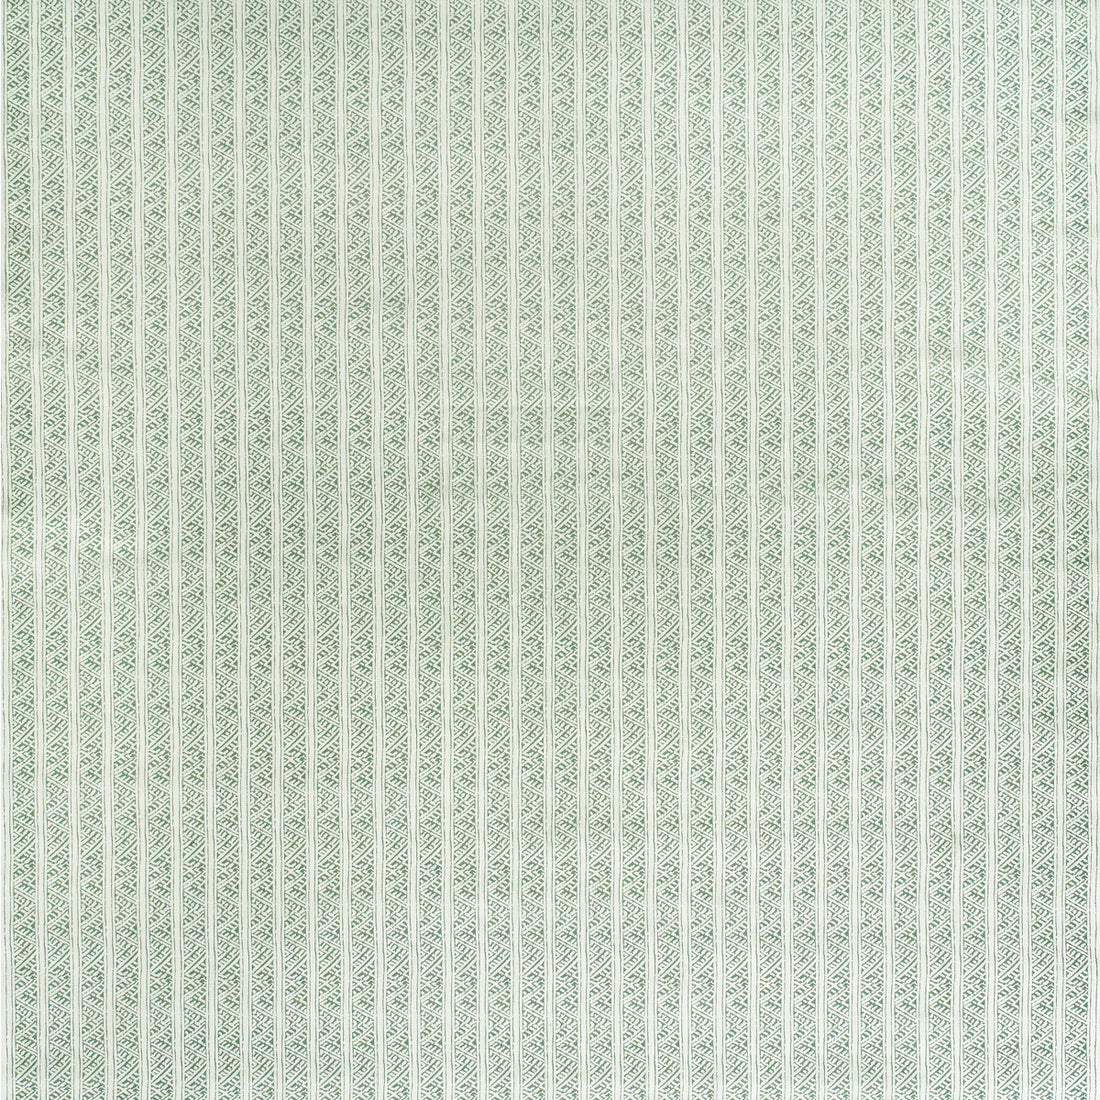 Ostuni Stripe Outdoor fabric in celadon color - pattern AM100388.315.0 - by Kravet Couture in the Andrew Martin Sophie Patterson Outdoor collection